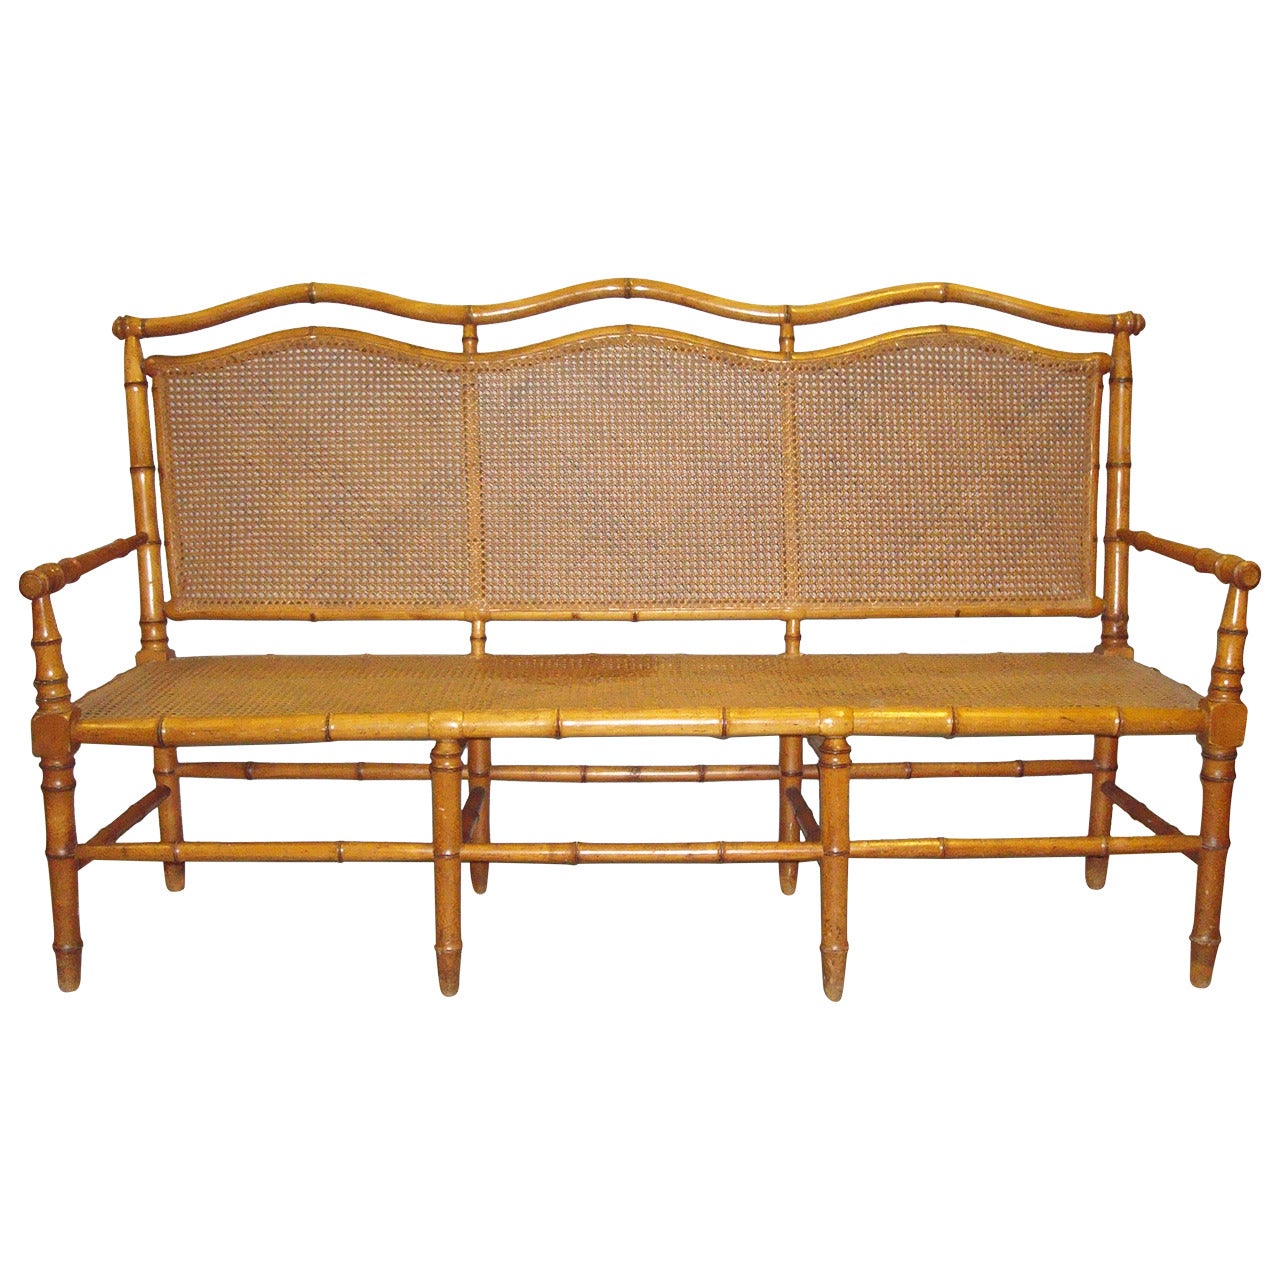 Stylish 19th Century Cherrywood Faux Bamboo Settee or Hall Seat For Sale